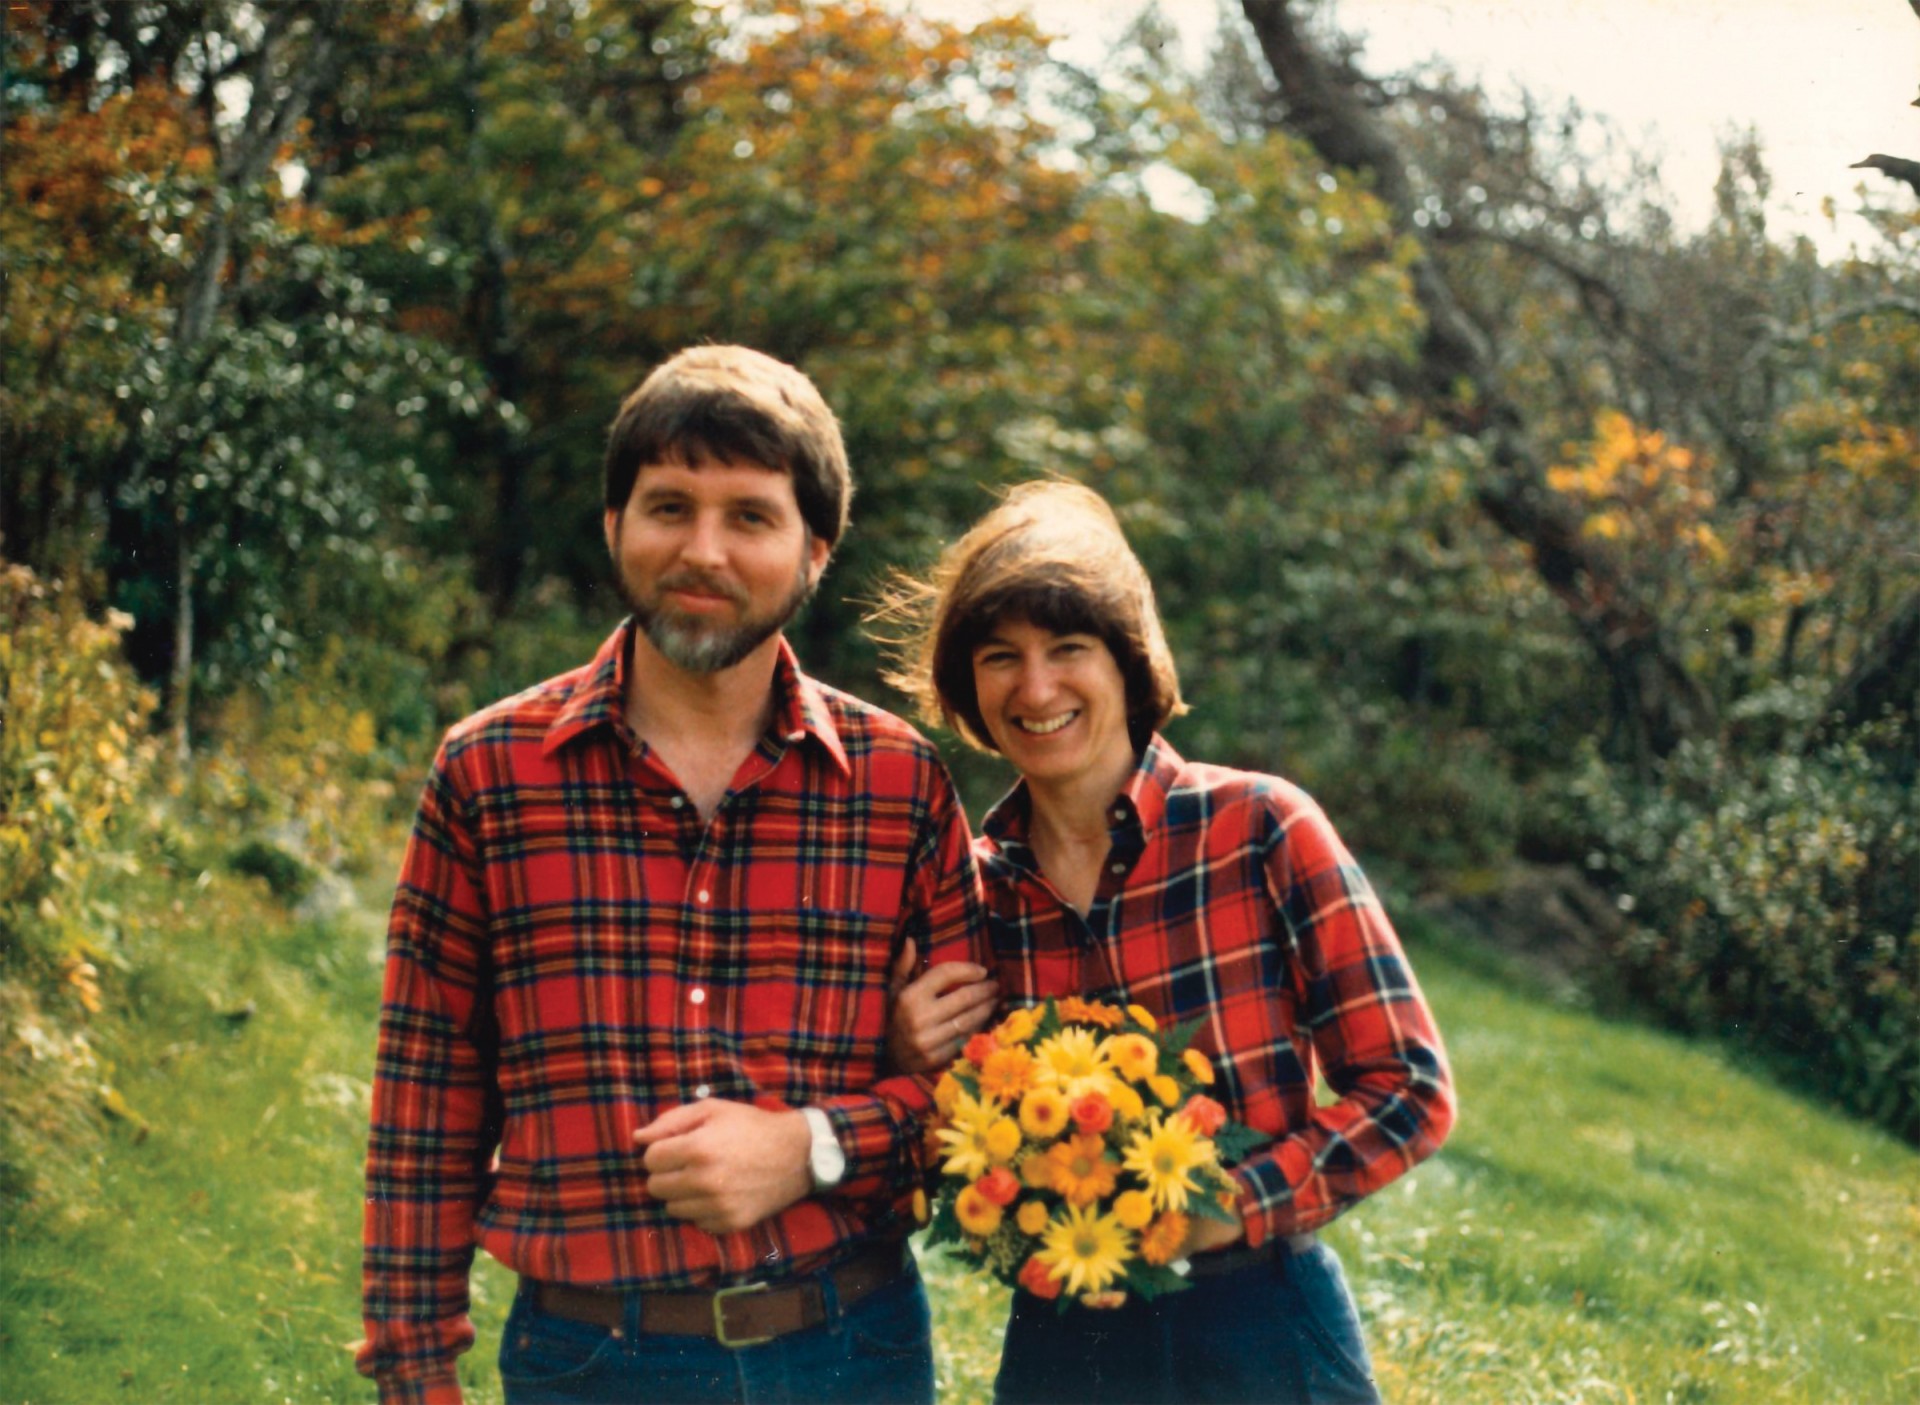 Ray and Laura Pease on their wedding day in 1986 at Craggy Gardens on the Blue Ridge Parkway.